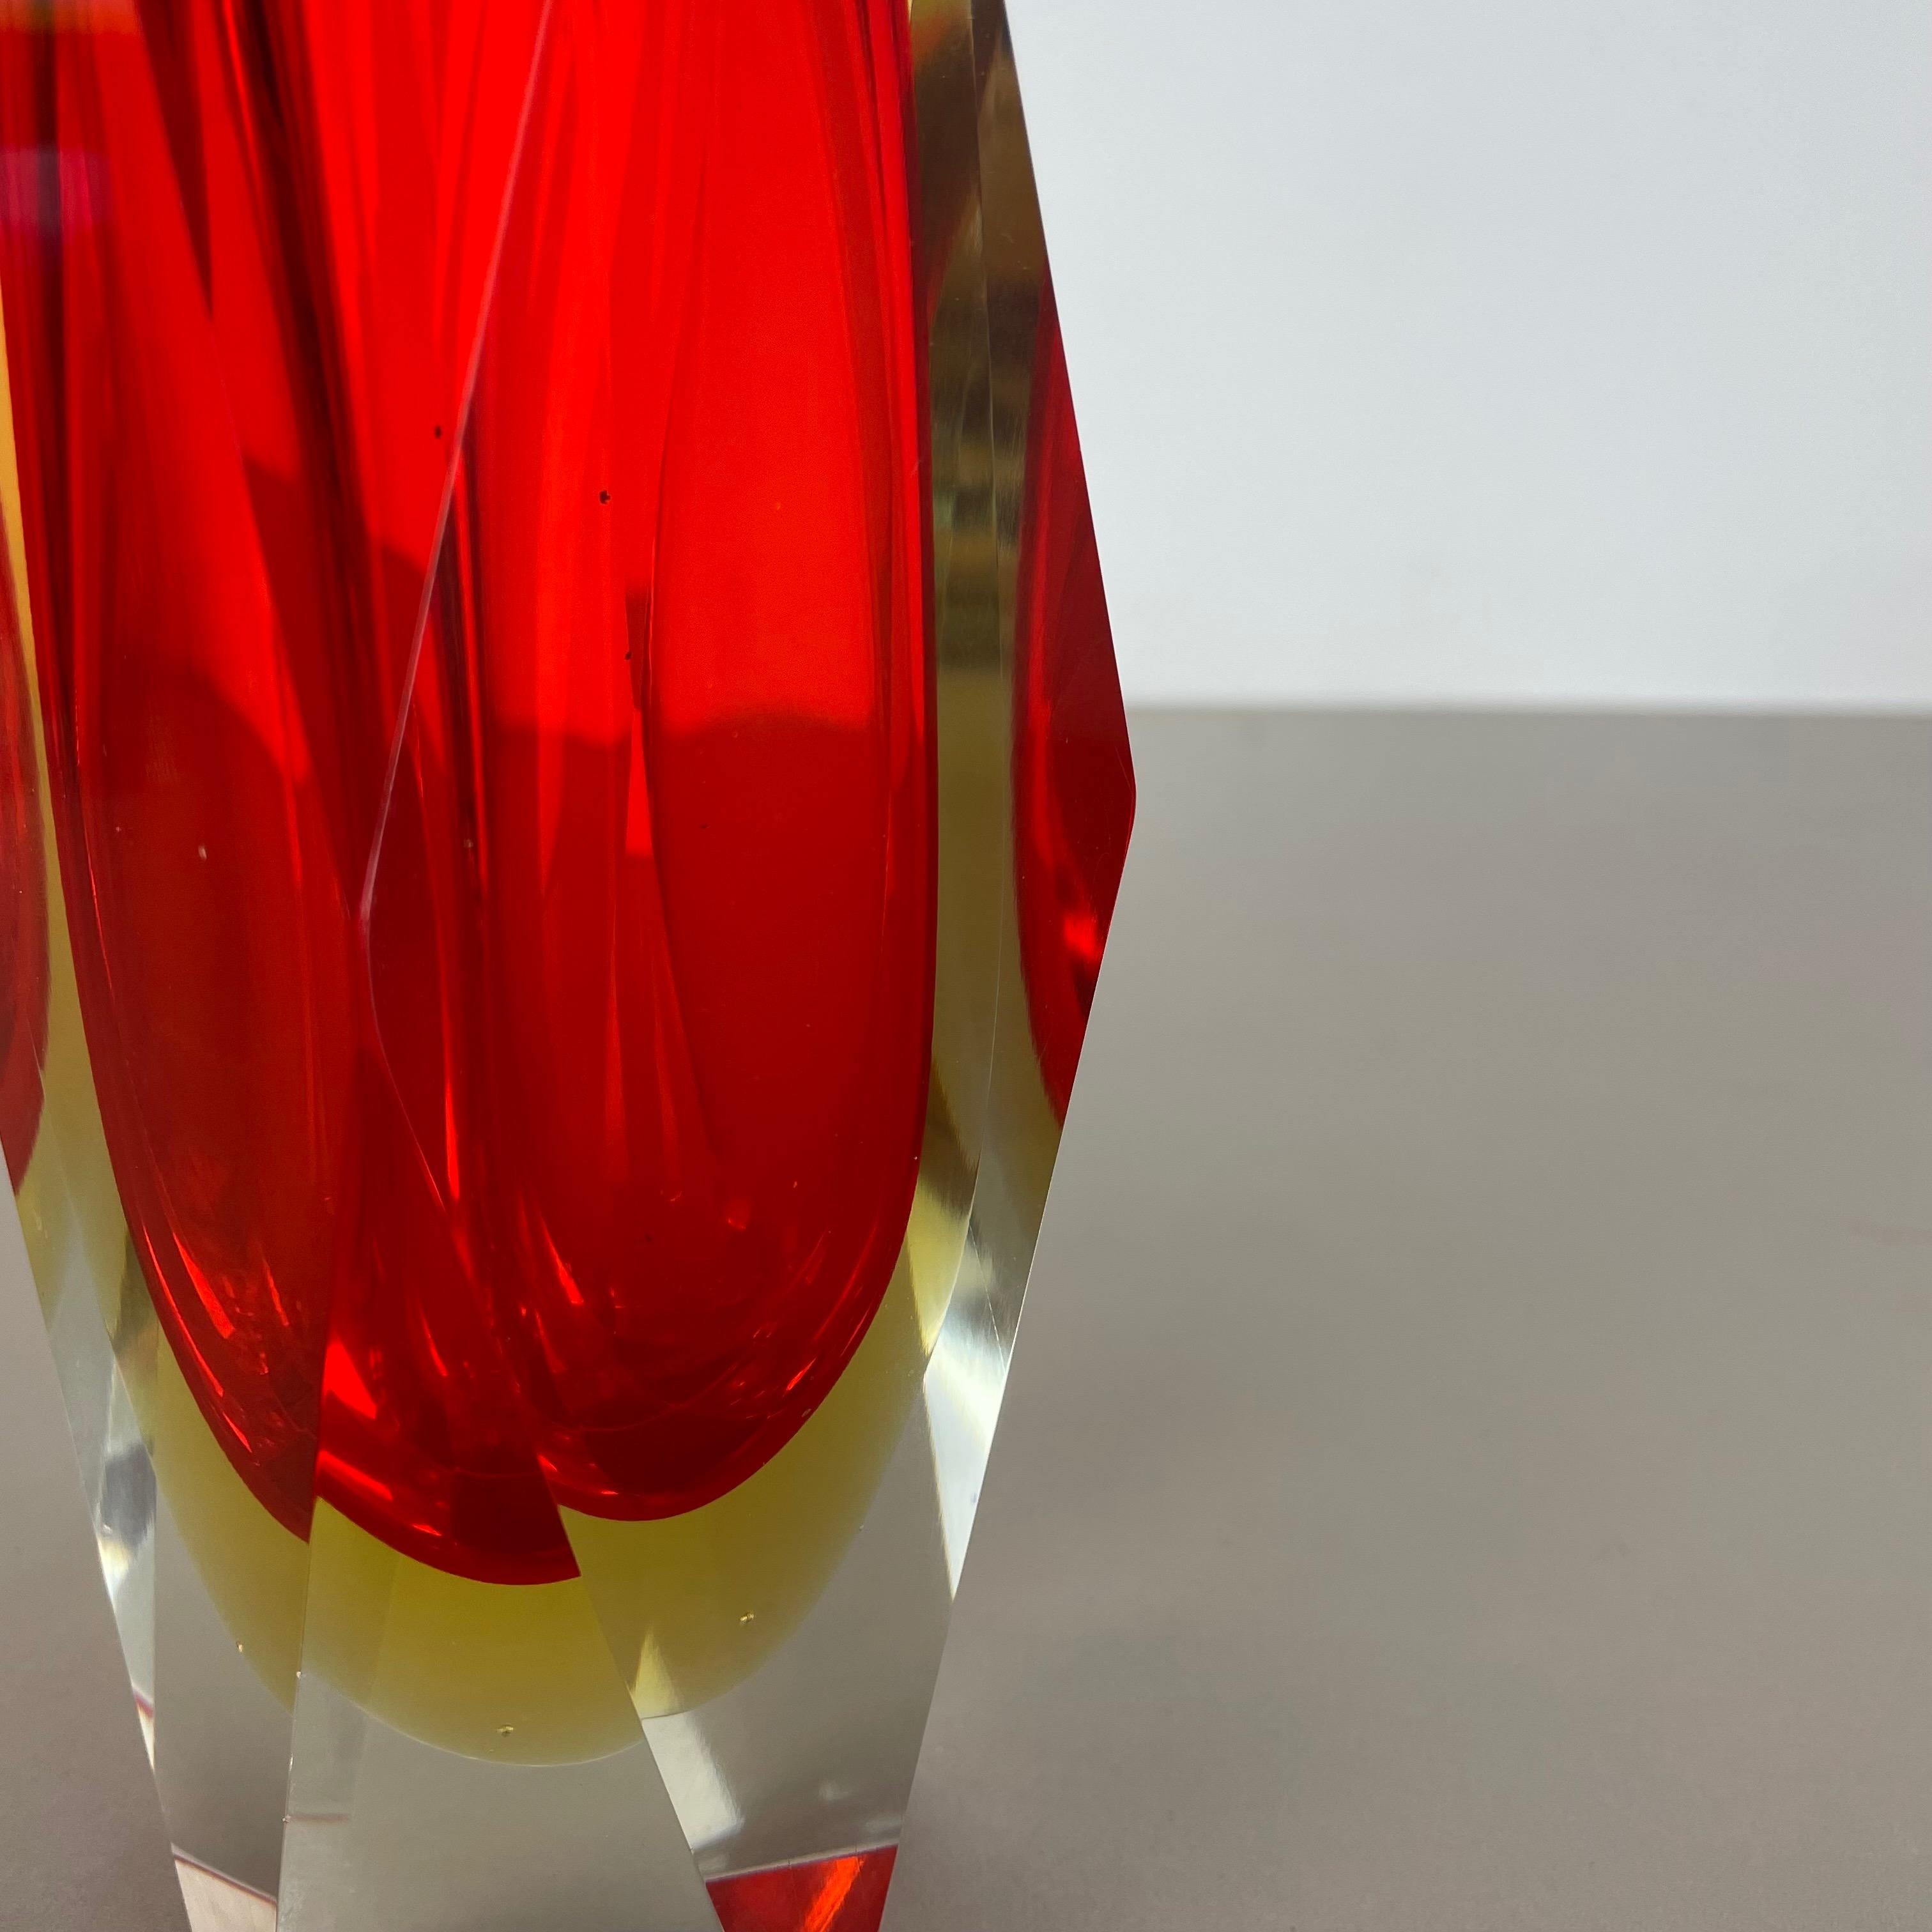 Large Red Murano Glass Sommerso Vase by Flavio Poli Attributed, Italy 1970s For Sale 1